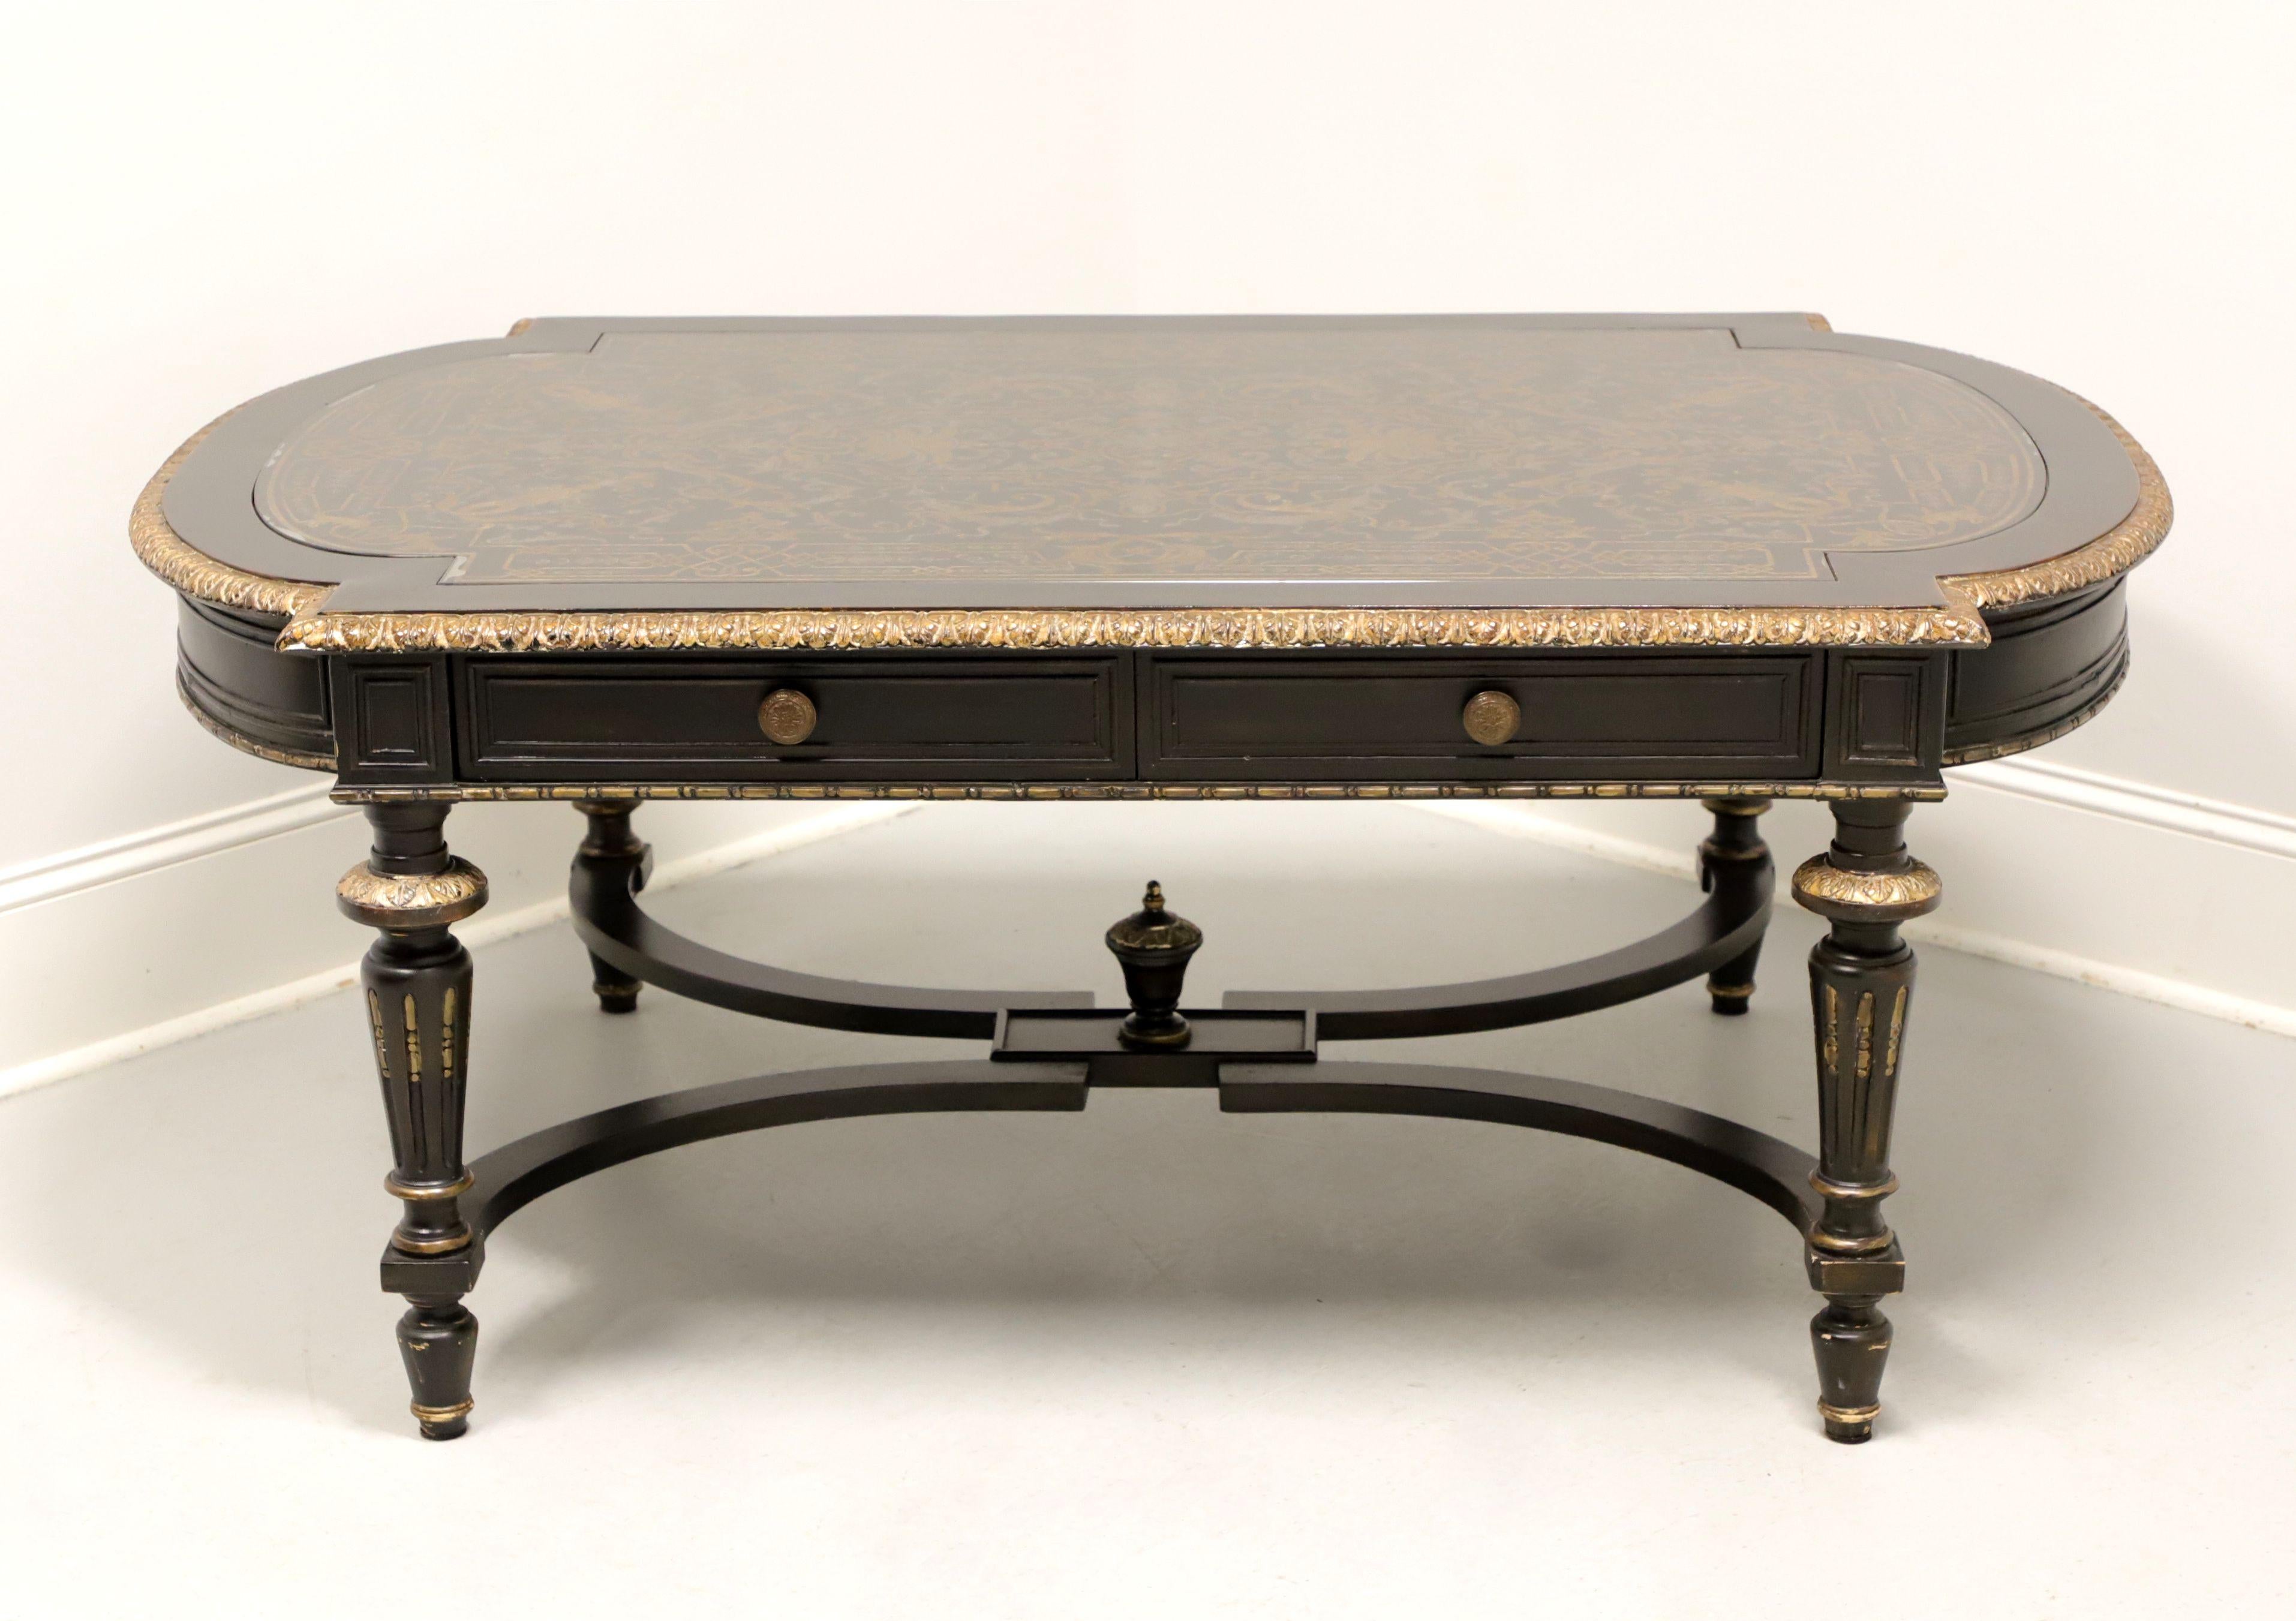 A French Napoleon III style oval coffee table by Maitland Smith. Solid wood painted an ebony color with gold painted trim, reverse painted top with inset glass cover, gold painted gadroon edge, decoratively embellished apron with concealed drawers,